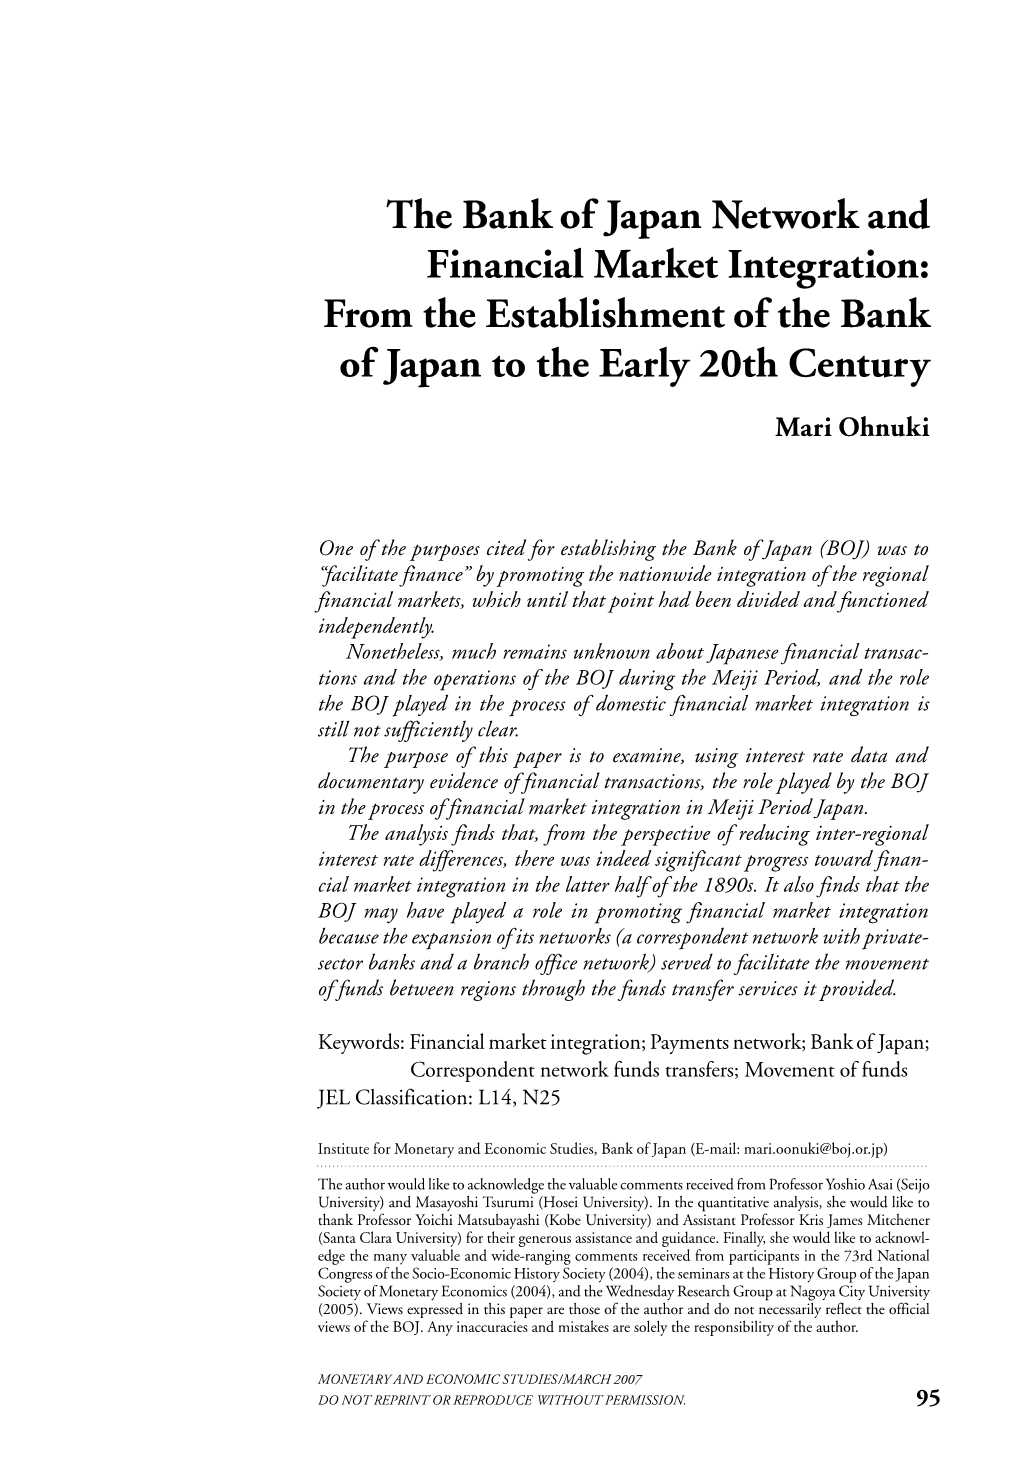 The Bank of Japan Network and Financial Market Integration: from the Establishment of the Bank of Japan to the Early 20Th Century